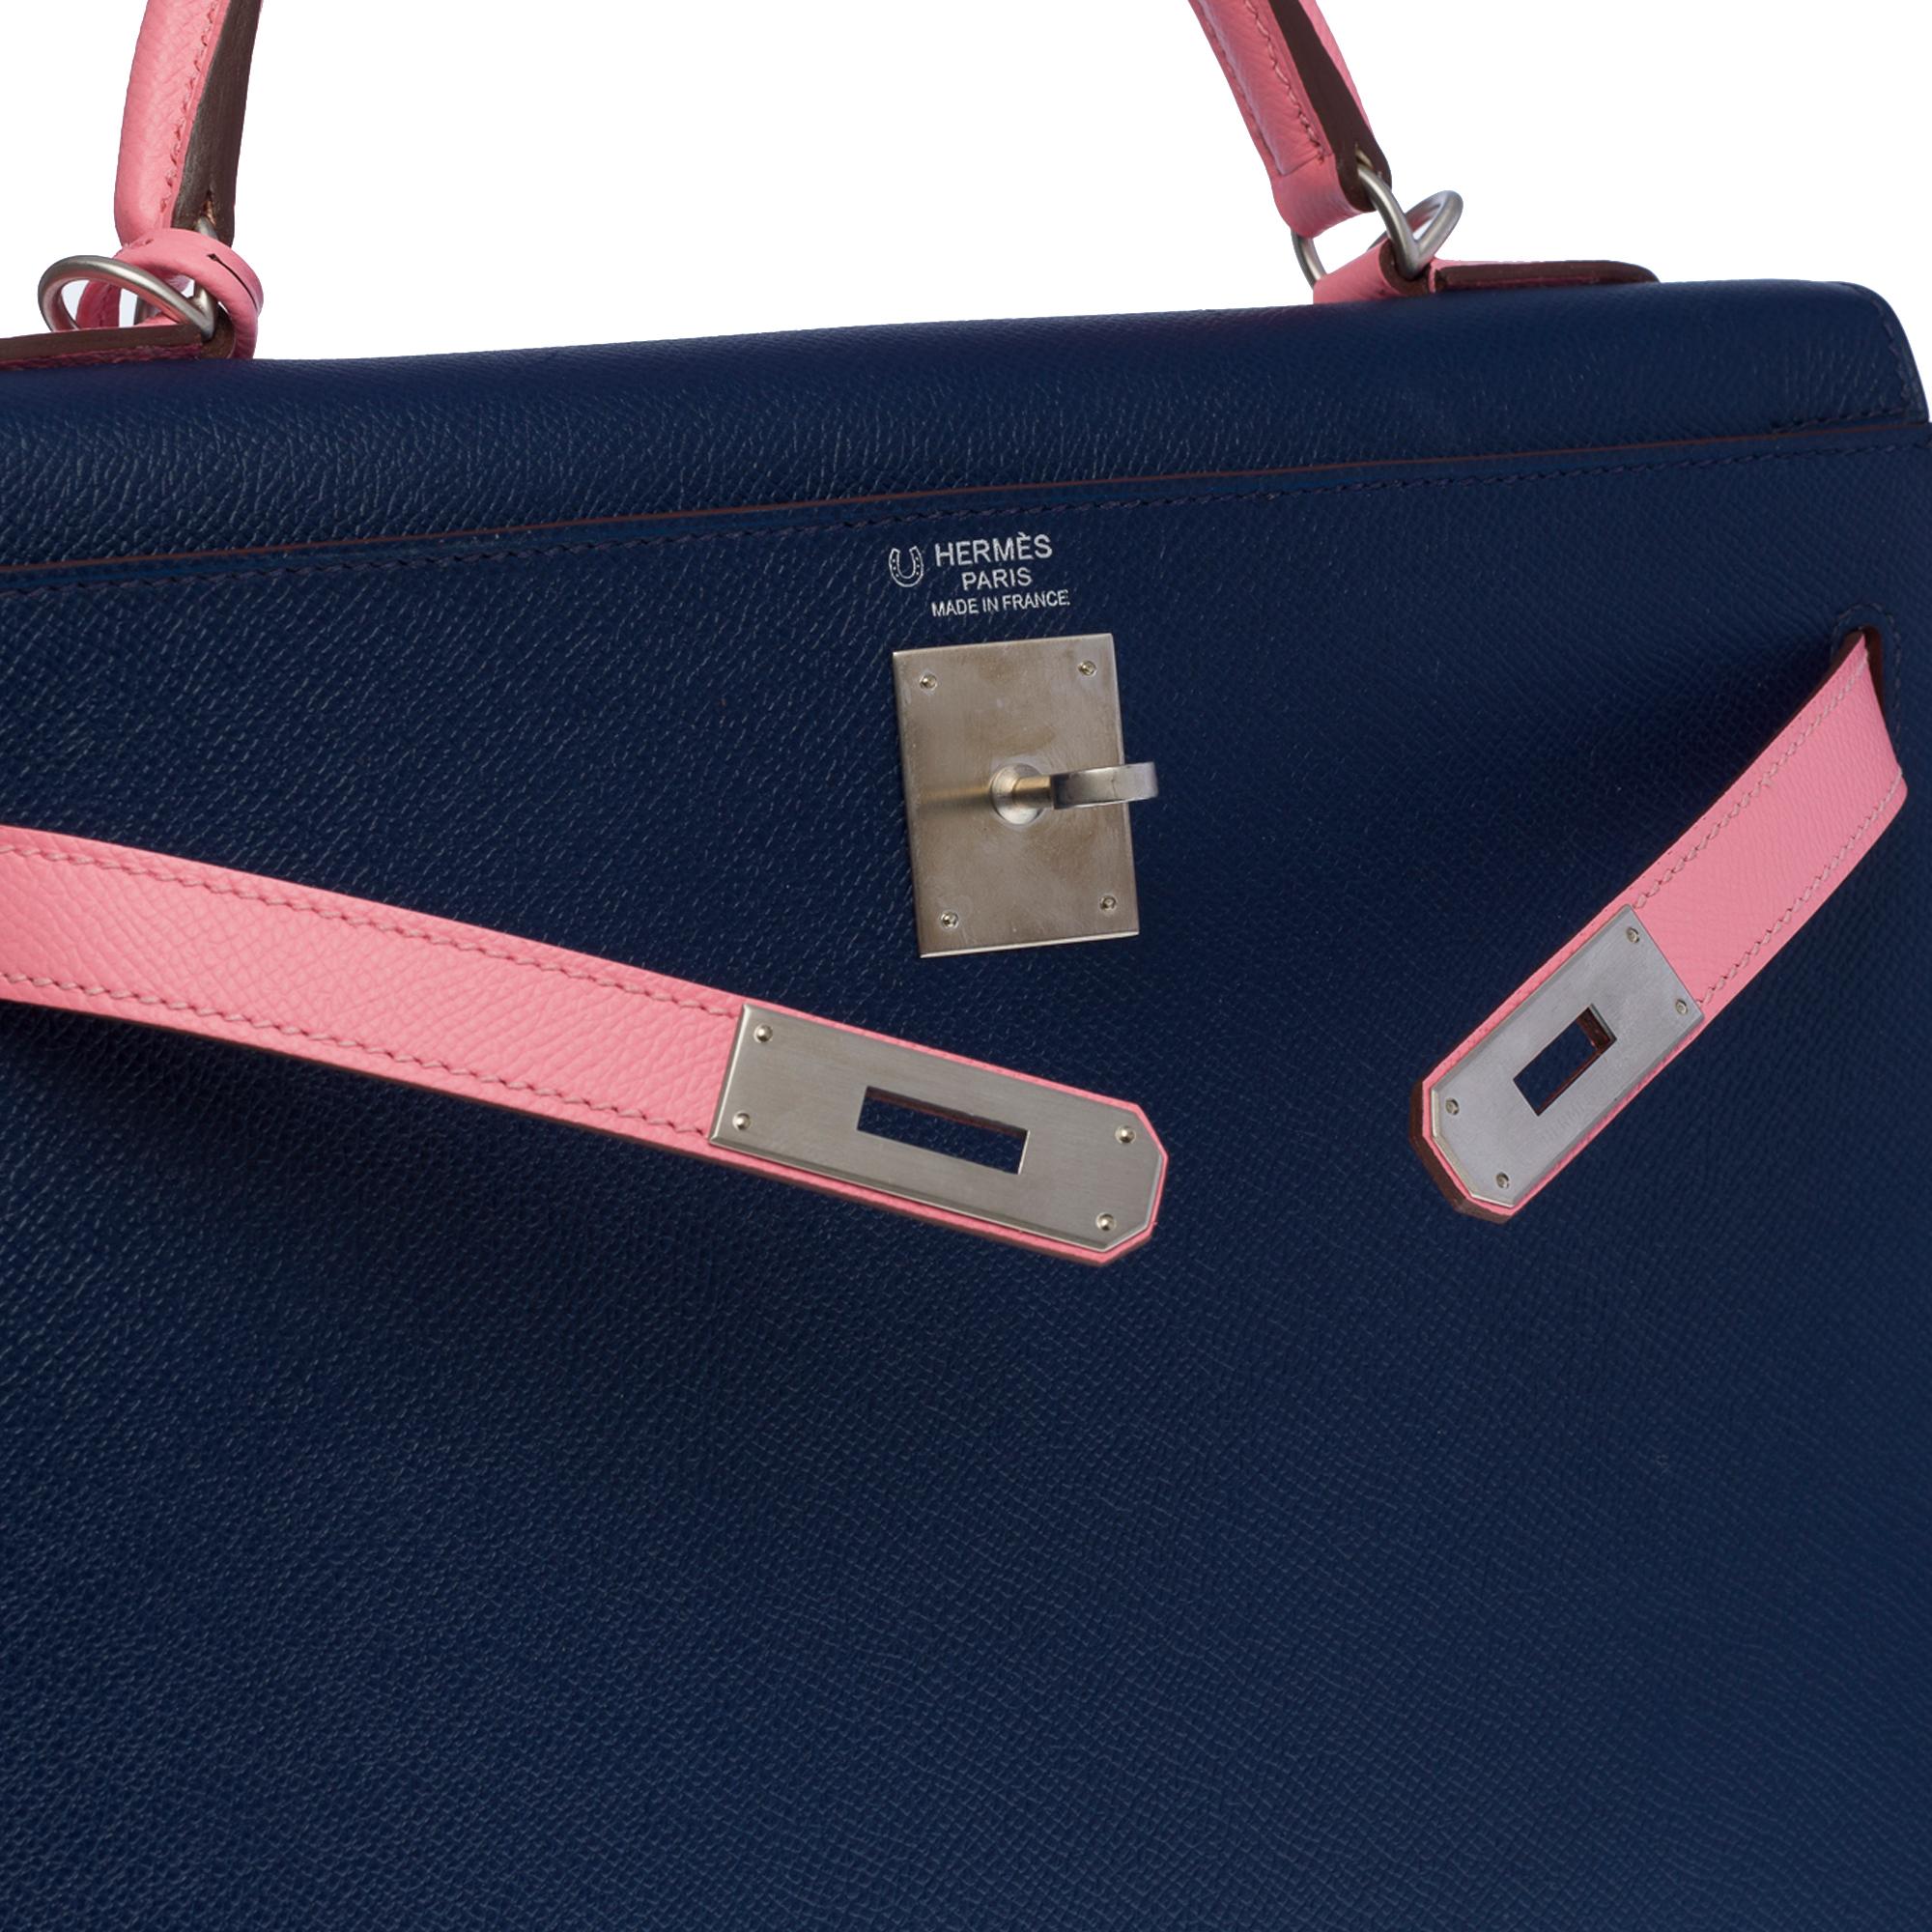 Hermès Kelly 32 sellier Special Order (HSS) in Pink and Blue Epsom leather, BSHW 2